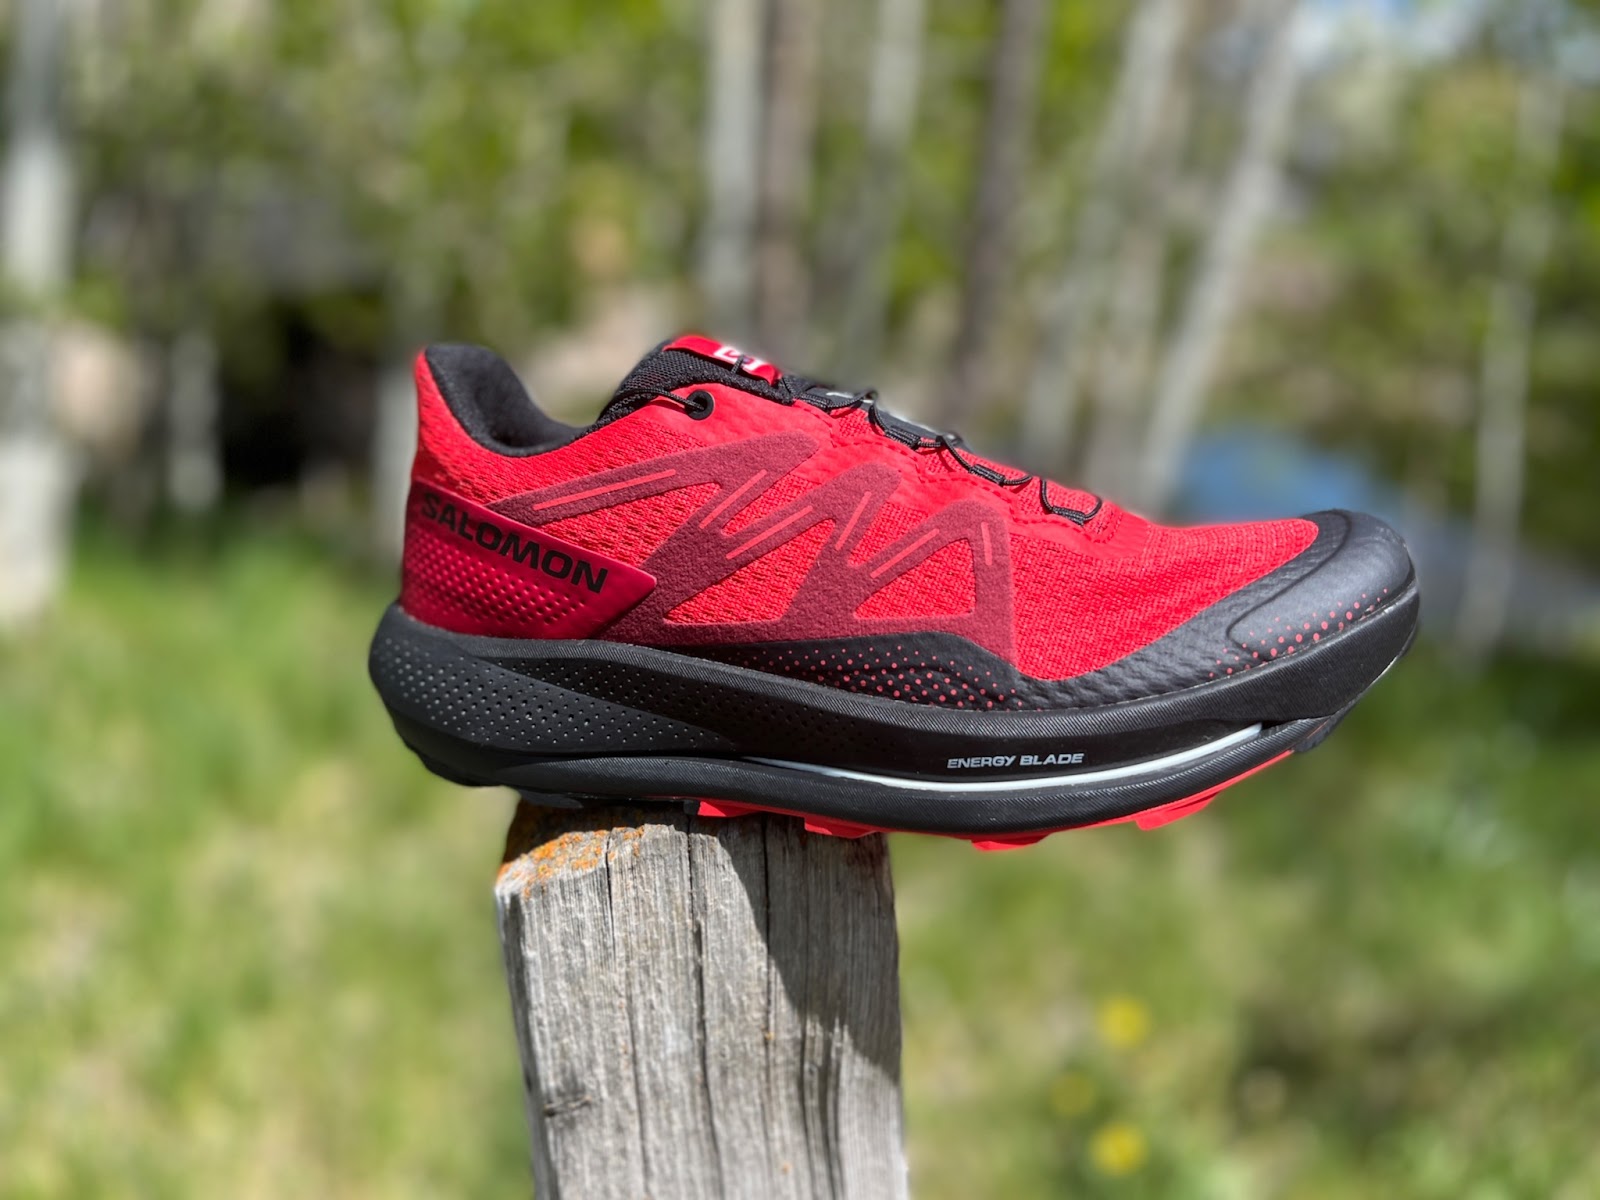 Road Trail Run: Salomon Pulsar Trail Review: The New Salomon! Plated,  Protective, Deeply Cushioned, Fun and Versatile.